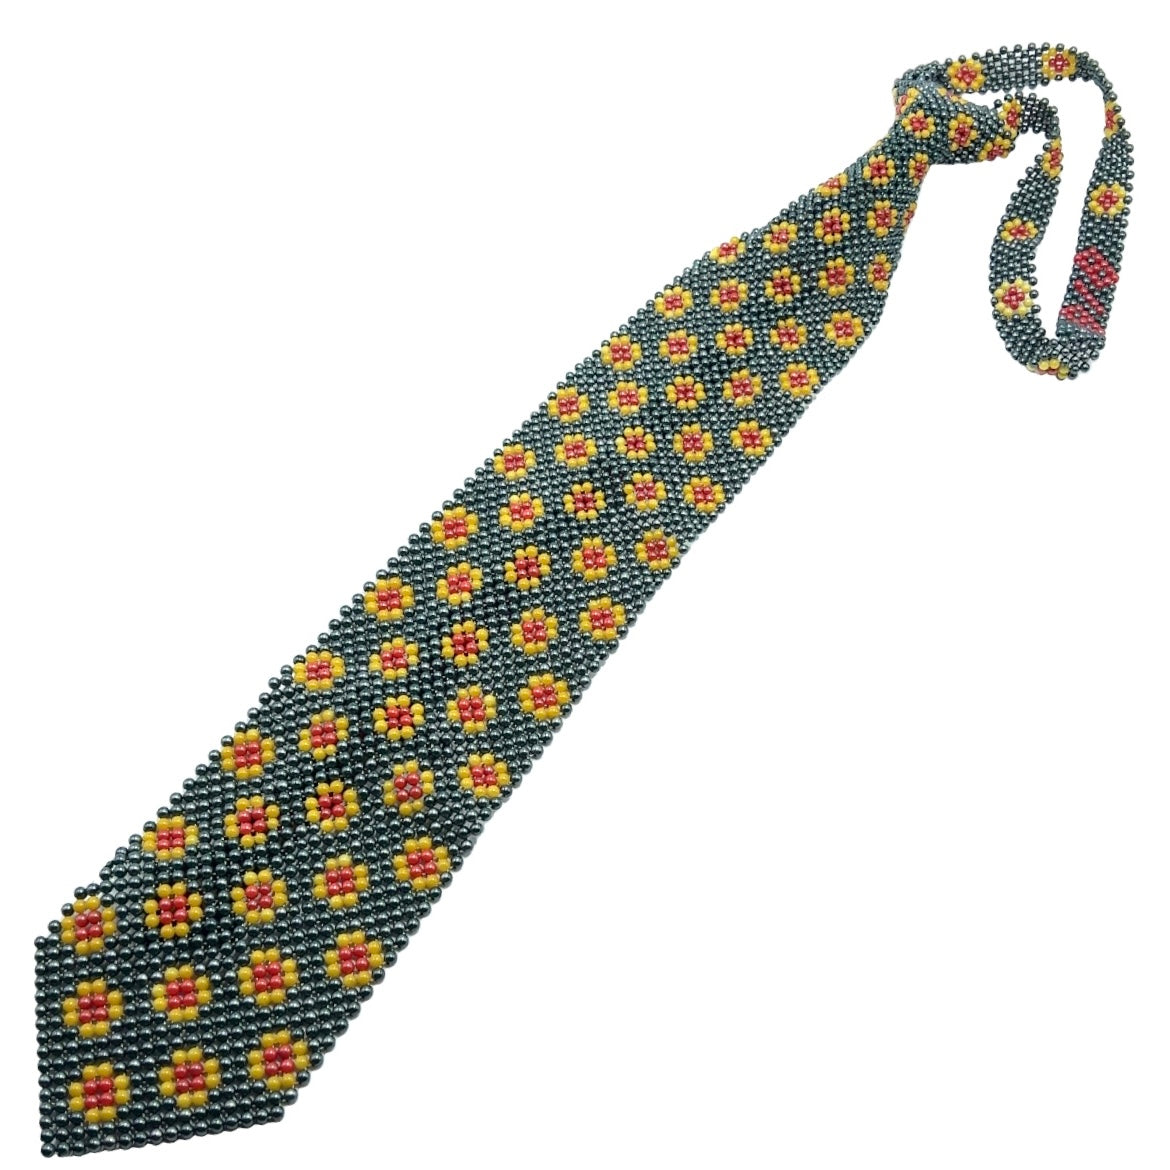 Handcrafted Flower Pattern Pearl Tie Delicate and Charming